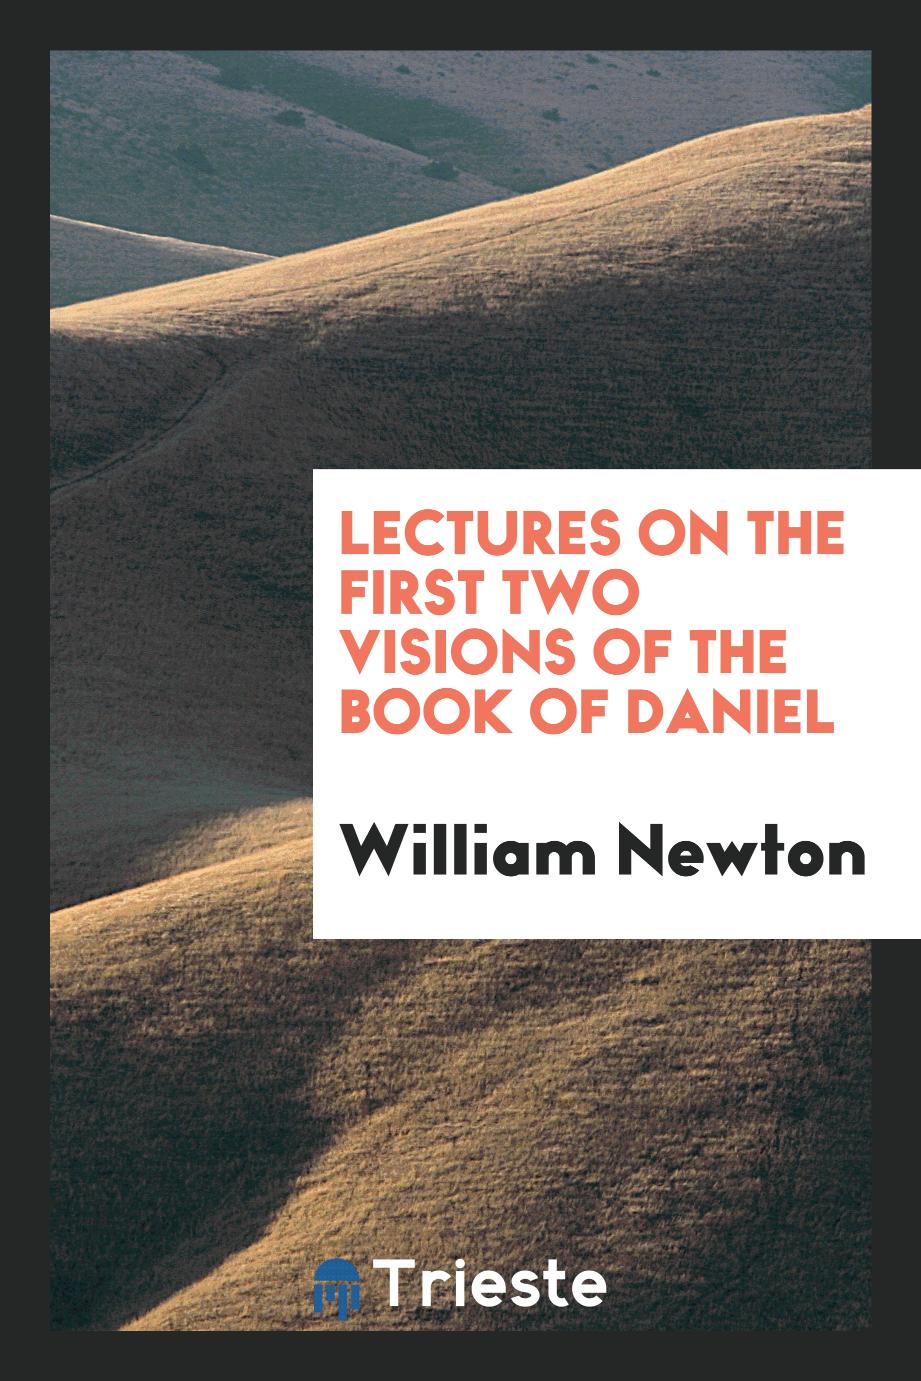 Lectures on the first two visions of the book of Daniel